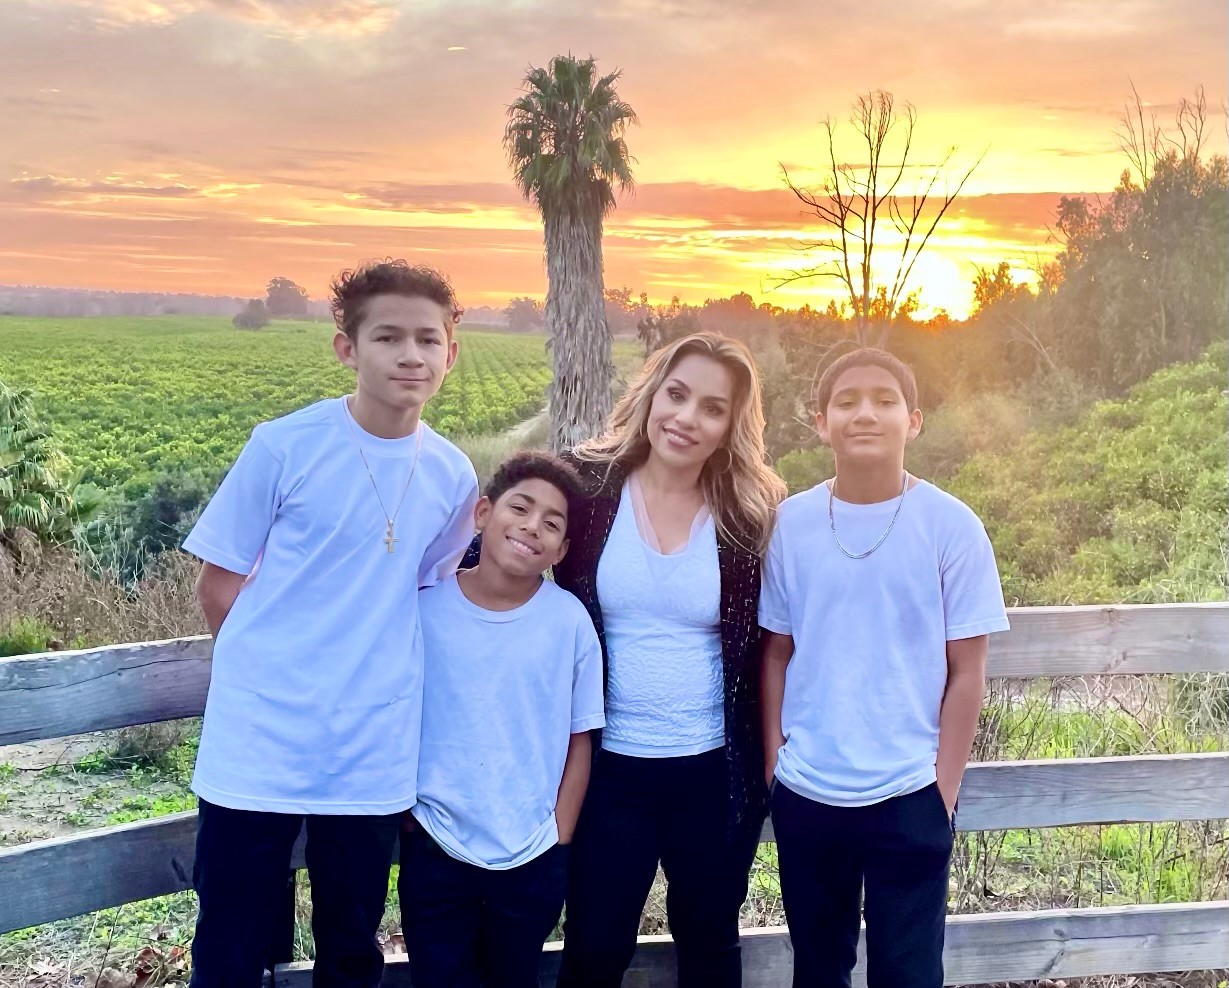 Michelle Castelo standing with three grandsons wearing white shirts and black pants in front of a nature scene with a sunset